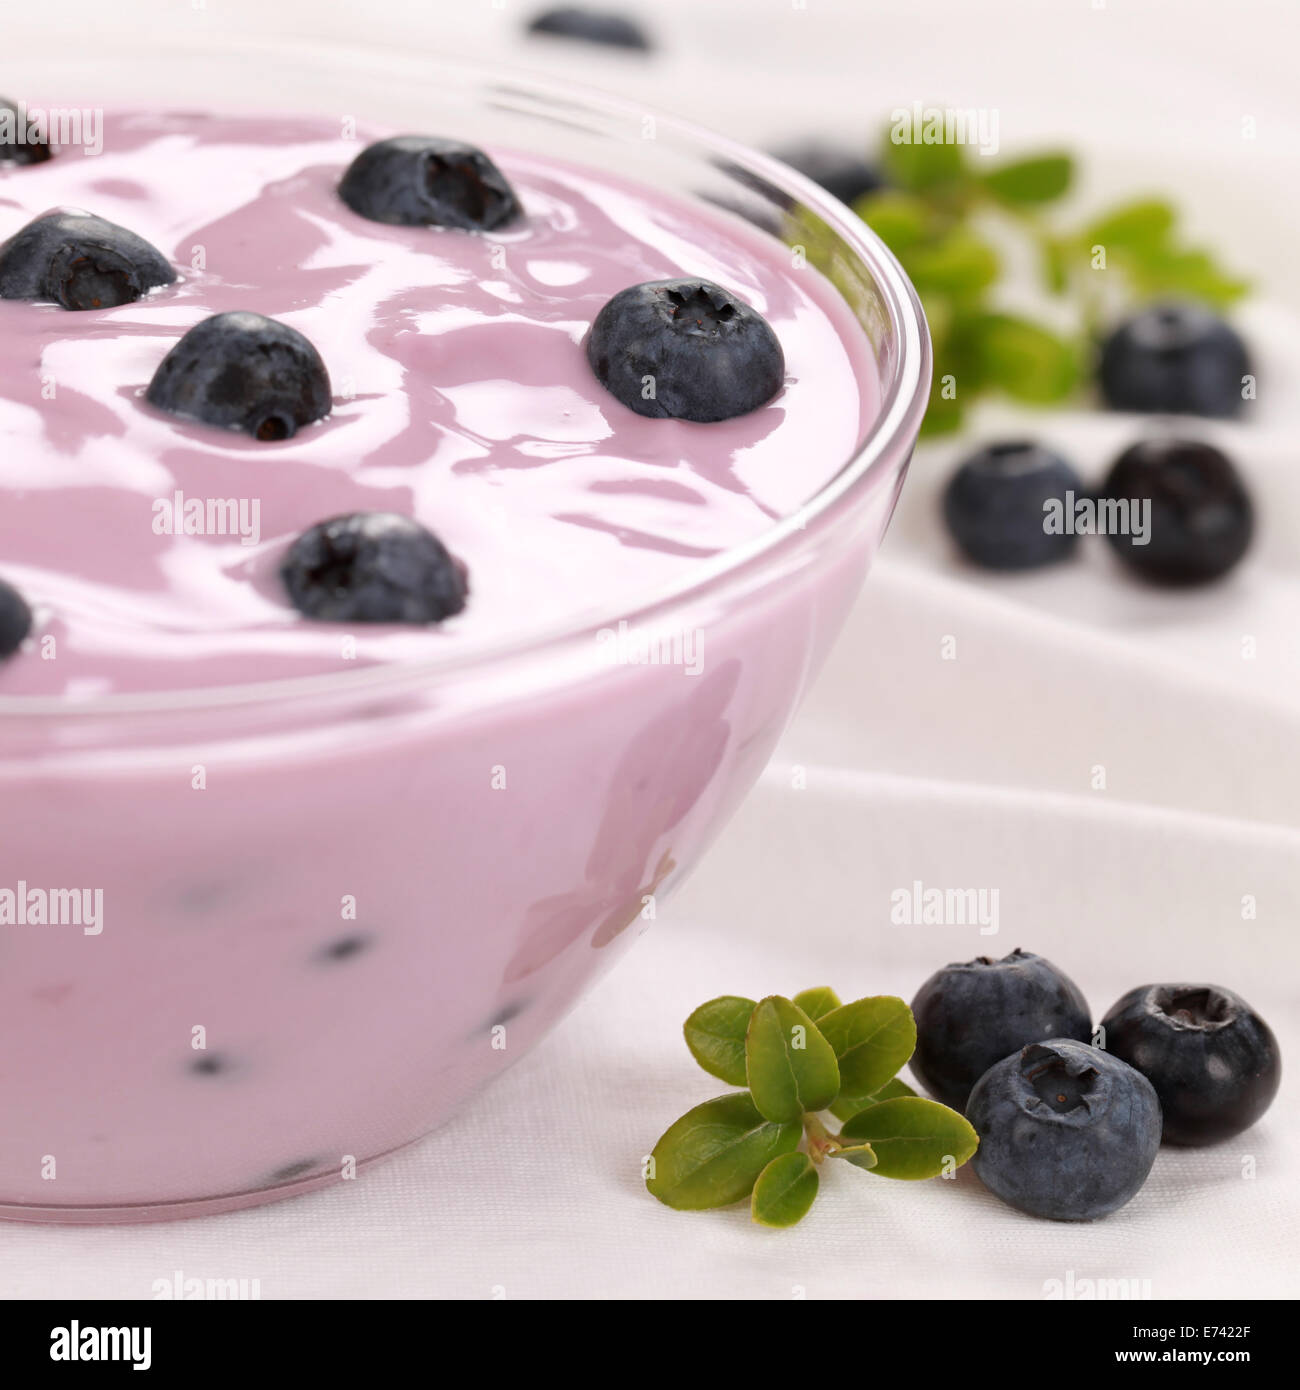 Blueberry yogurt in a glass bowl served with fresh blueberries Stock Photo